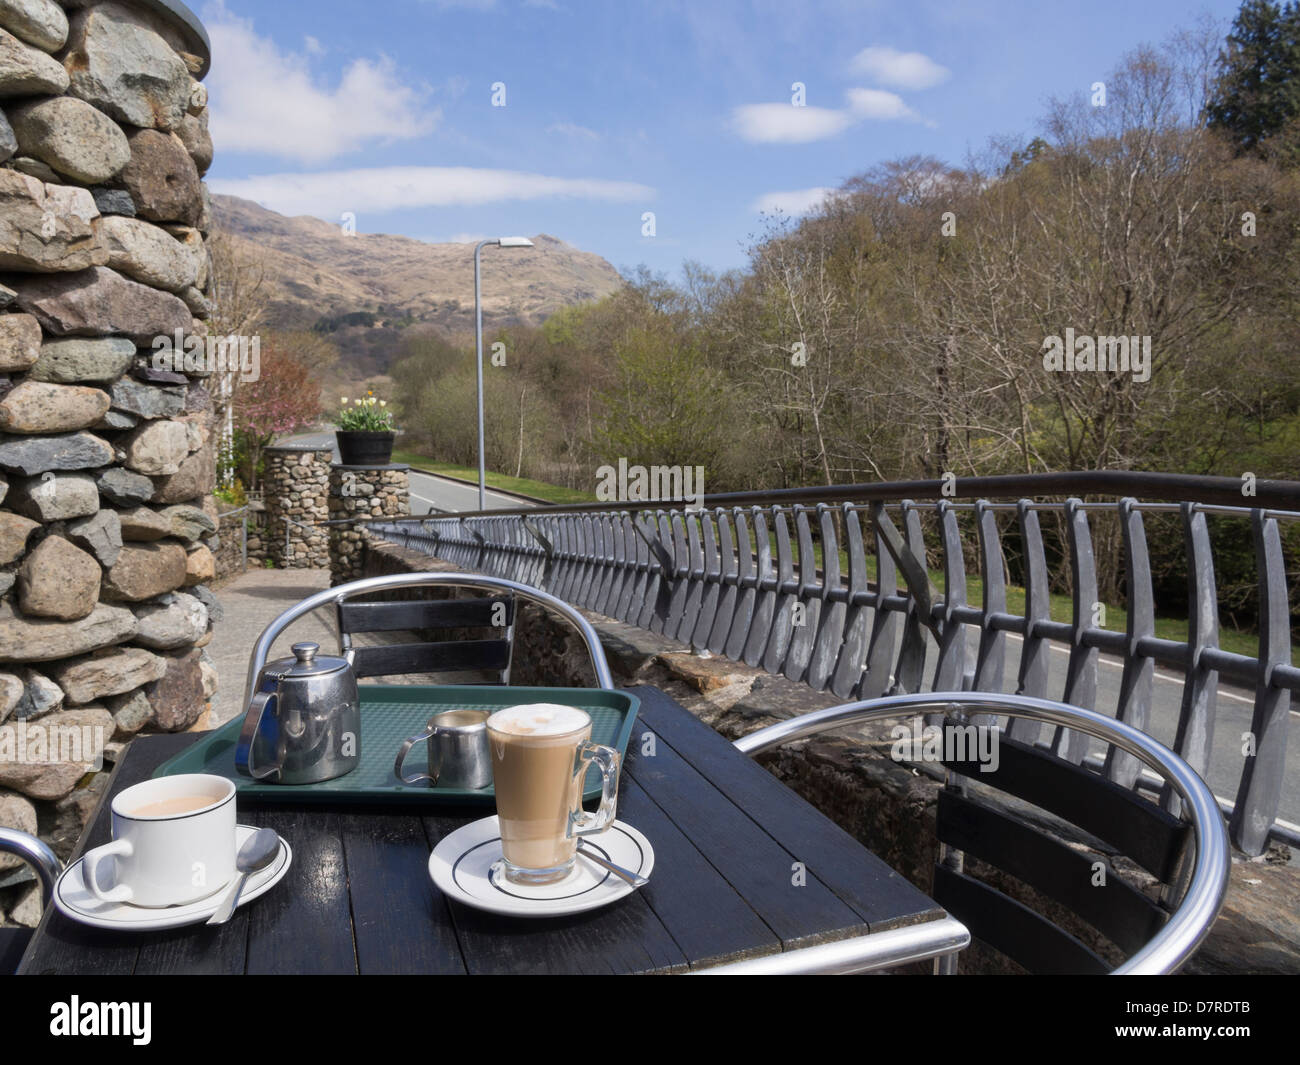 Table and chairs with tea and coffee cups outside Café Gwynant in Nantgwynant Valley in Snowdonia National Park, North Wales, UK Stock Photo